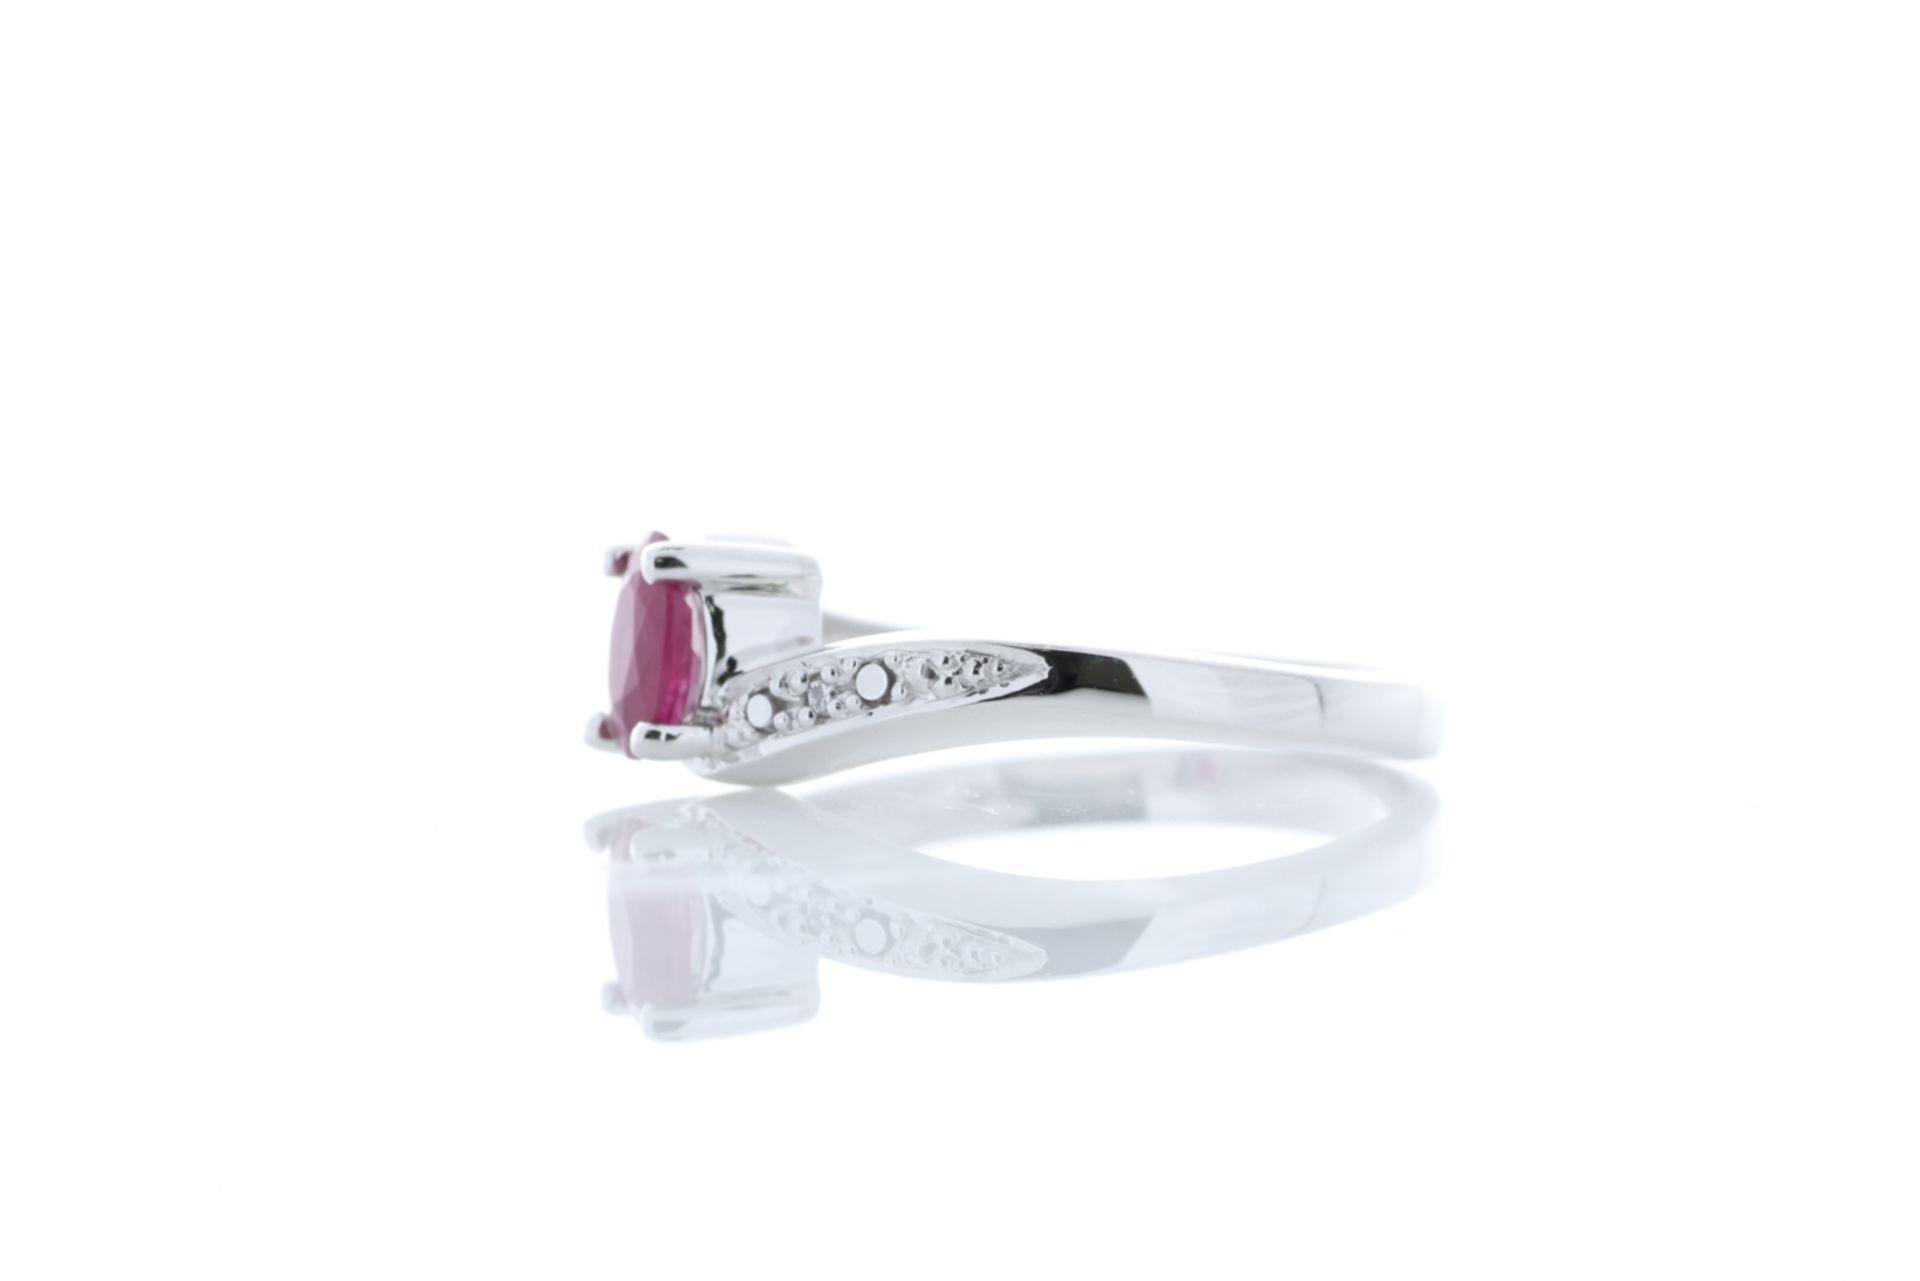 9ct White Gold Diamond And Ruby Ring 0.01 Carats - Valued by AGI £645.00 - 9ct White Gold Diamond - Image 2 of 4